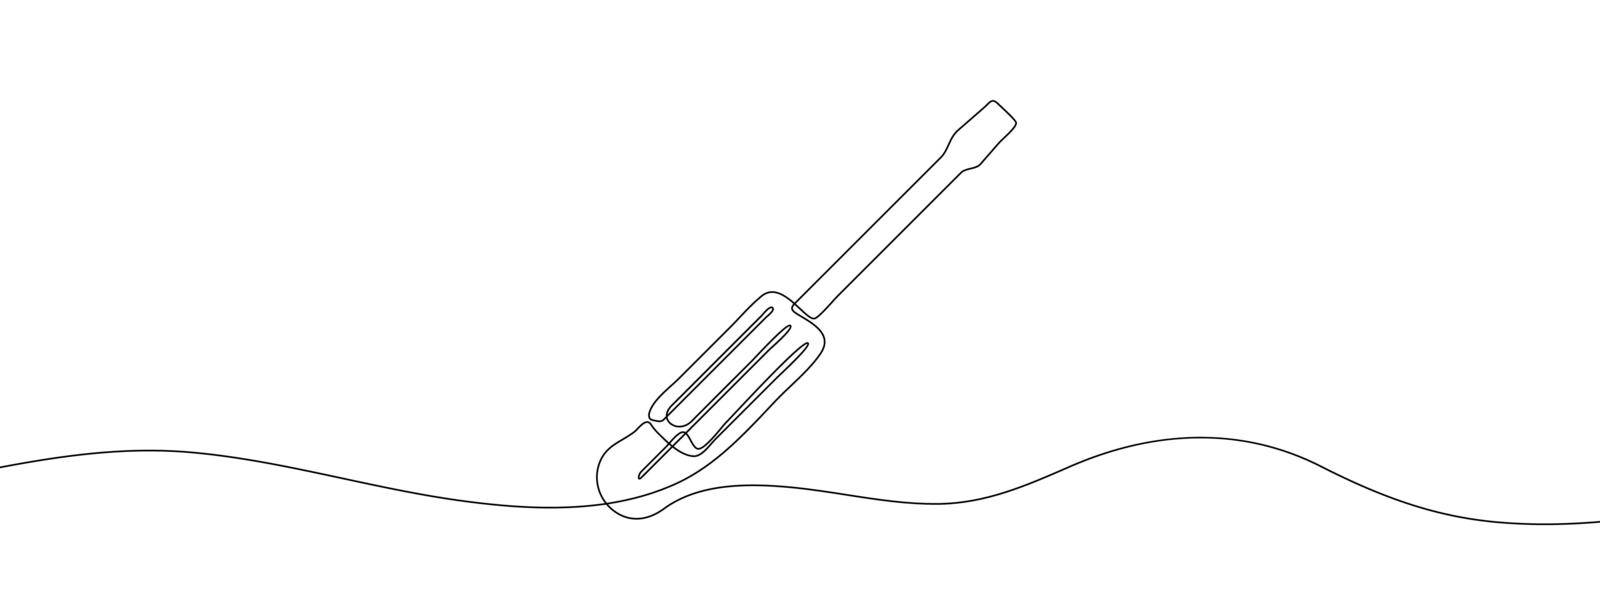 Continuous line drawing of screwdriver. Screwdriver linear icon. One line drawing background. Vector illustration. Screwdriver continuous line icon.